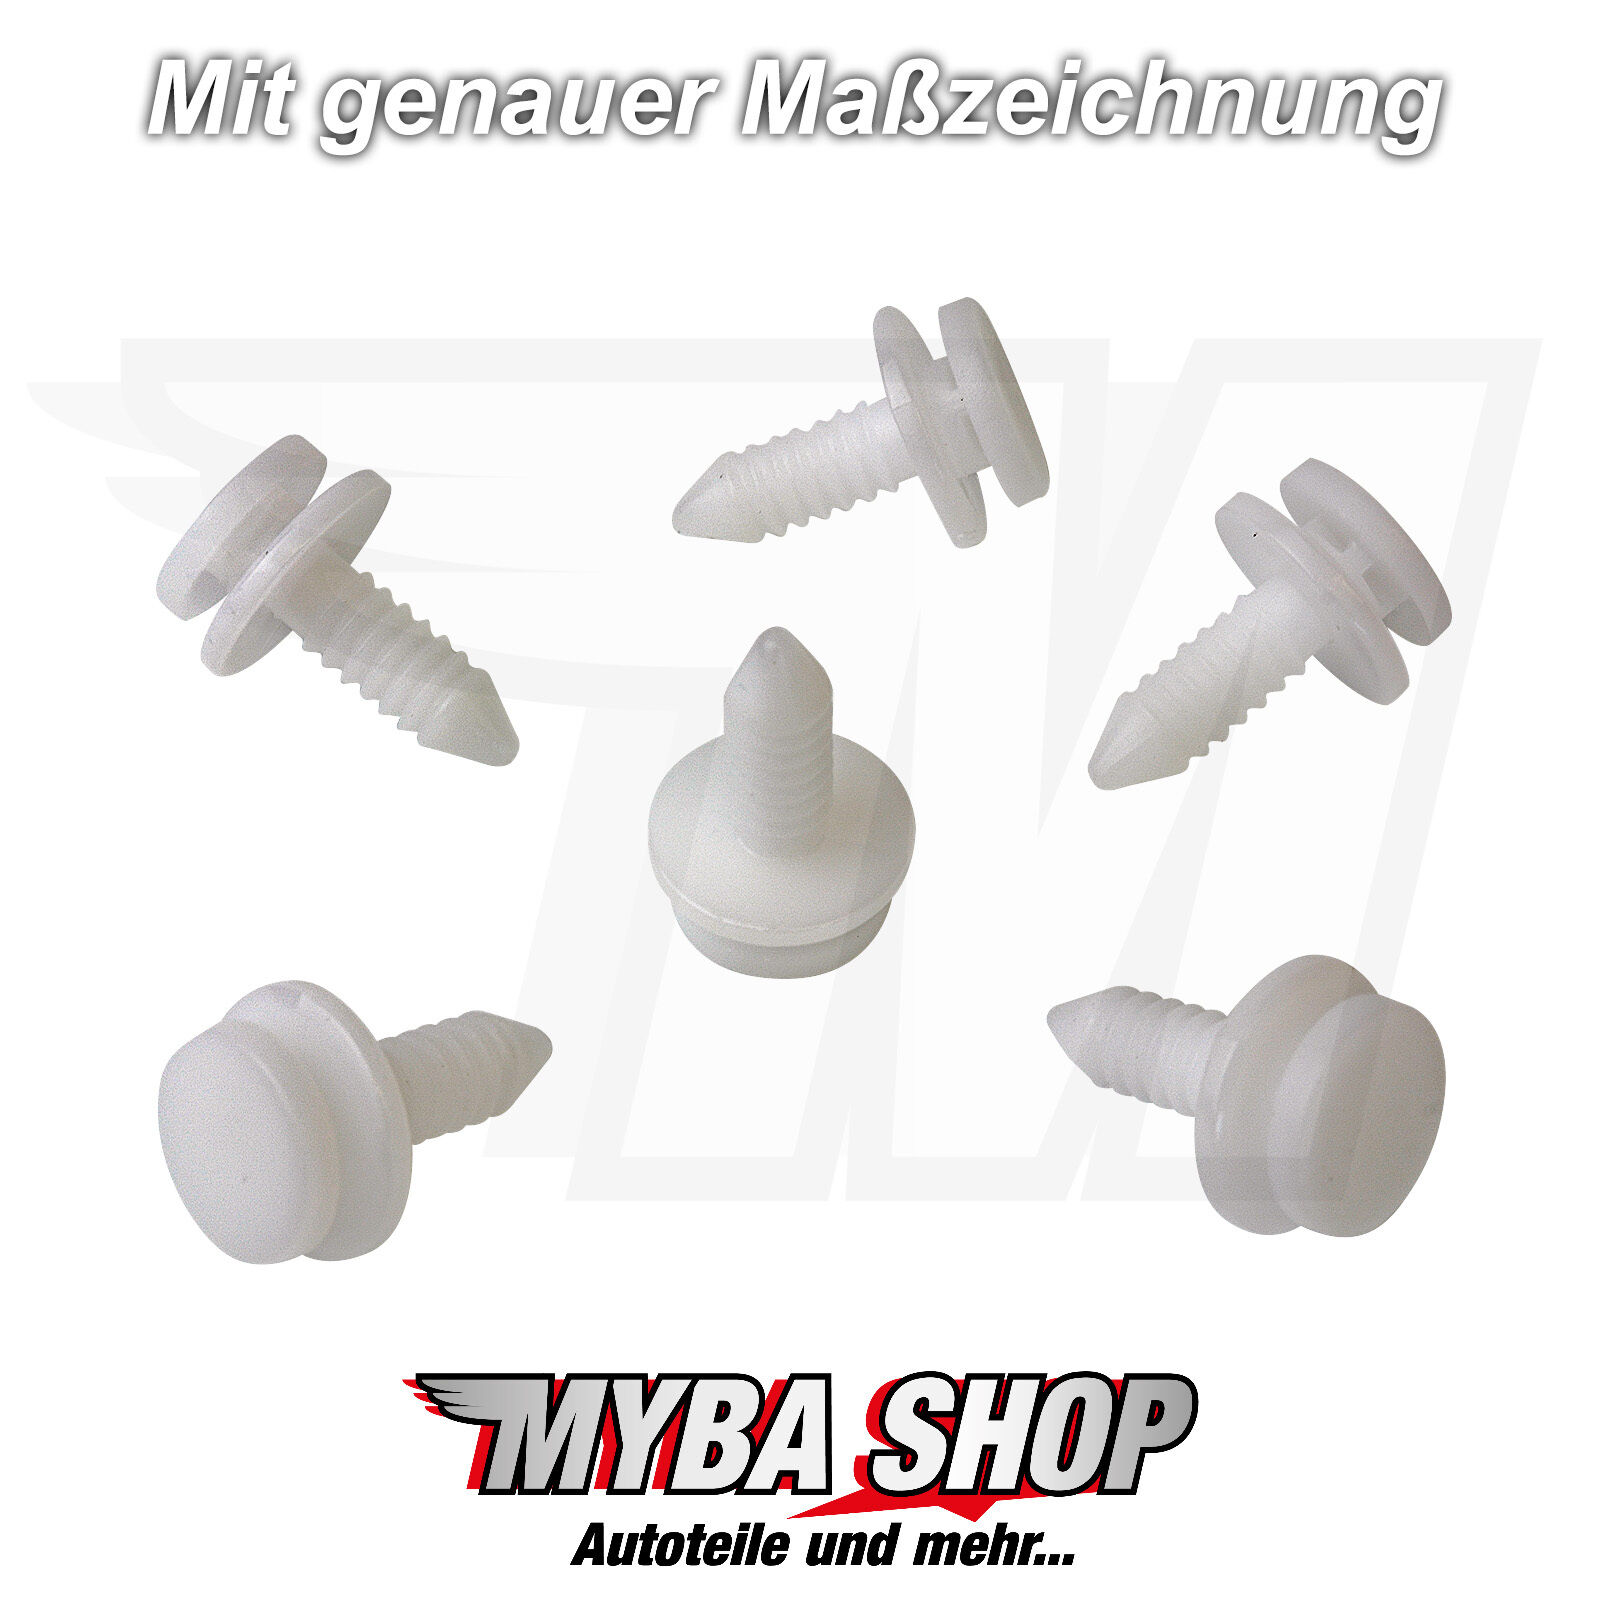 8x INTERIOR TRIM CLIP MOUNTING HOLDER CLIPS AUDI VW CLIPS IN WHITE 